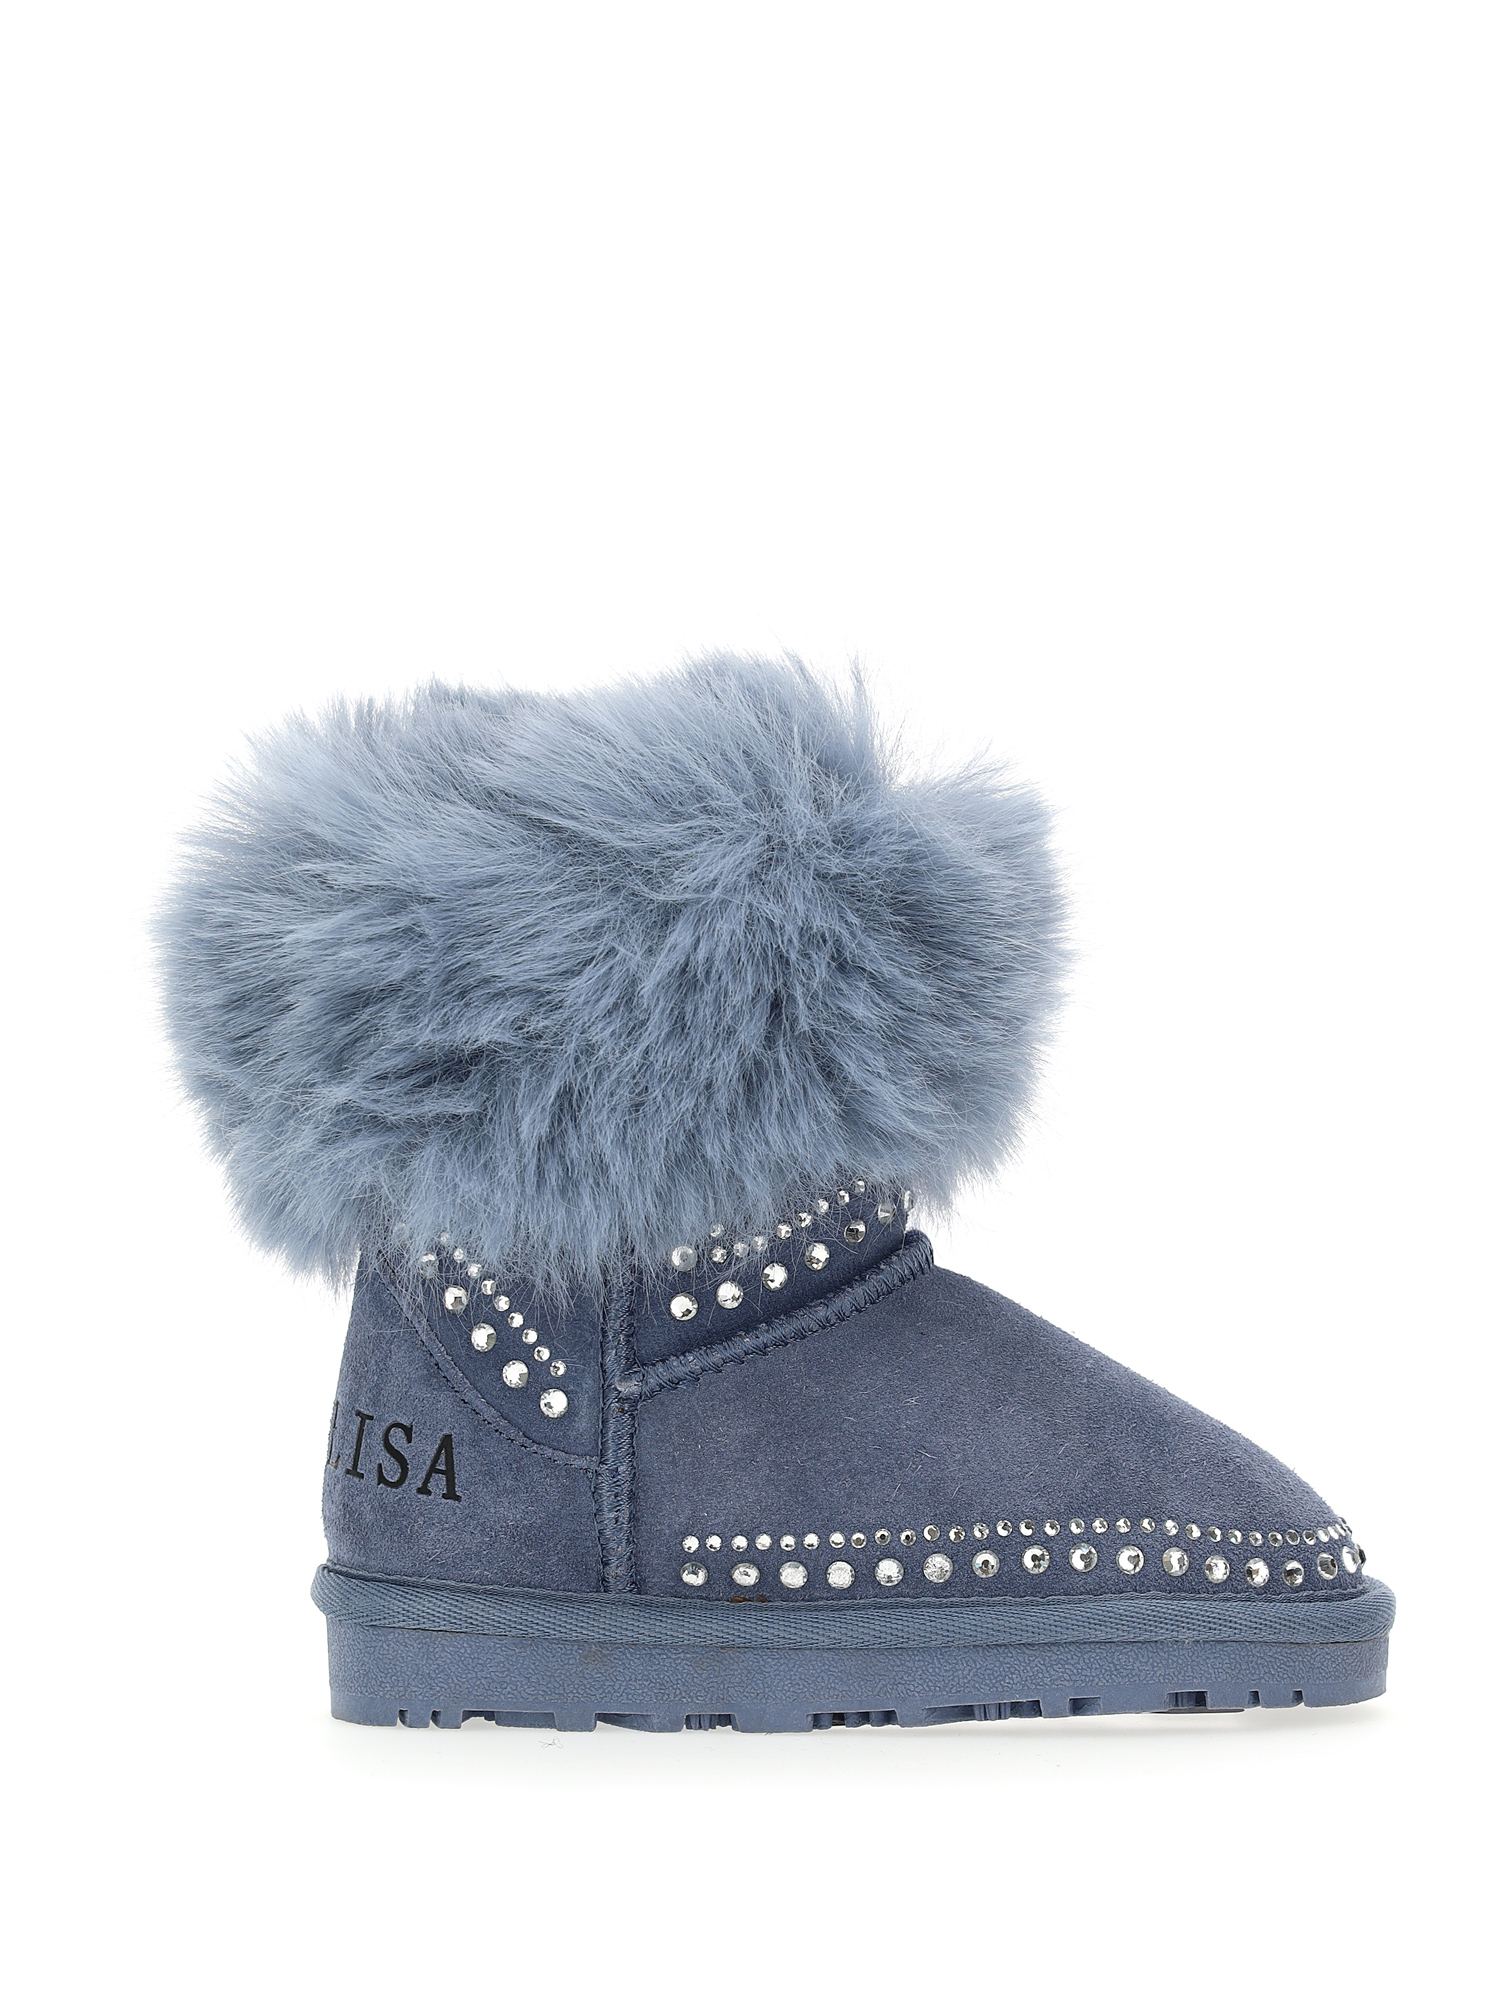 Monnalisa Crusted Leather Ankle Boots With Rhinestones In Steel Blue